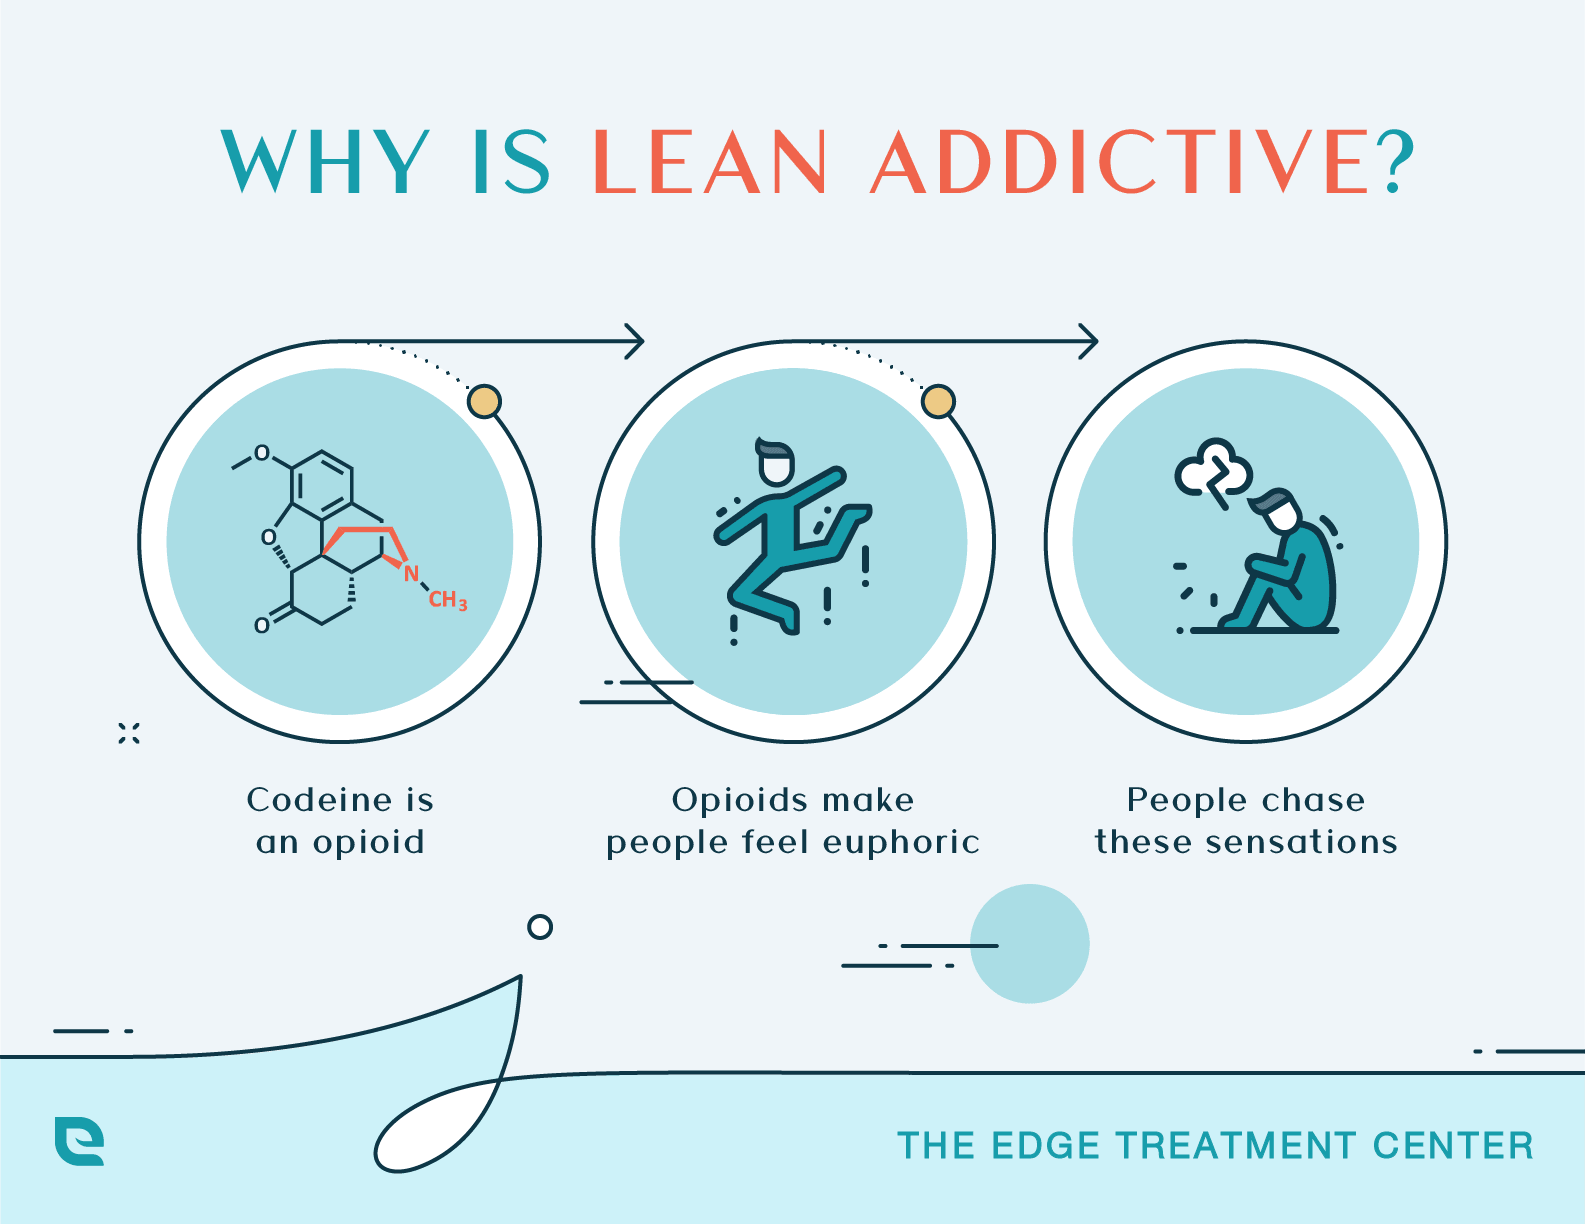 What is Lean Addictive? This image describe 3 reasons why lean is addictive.